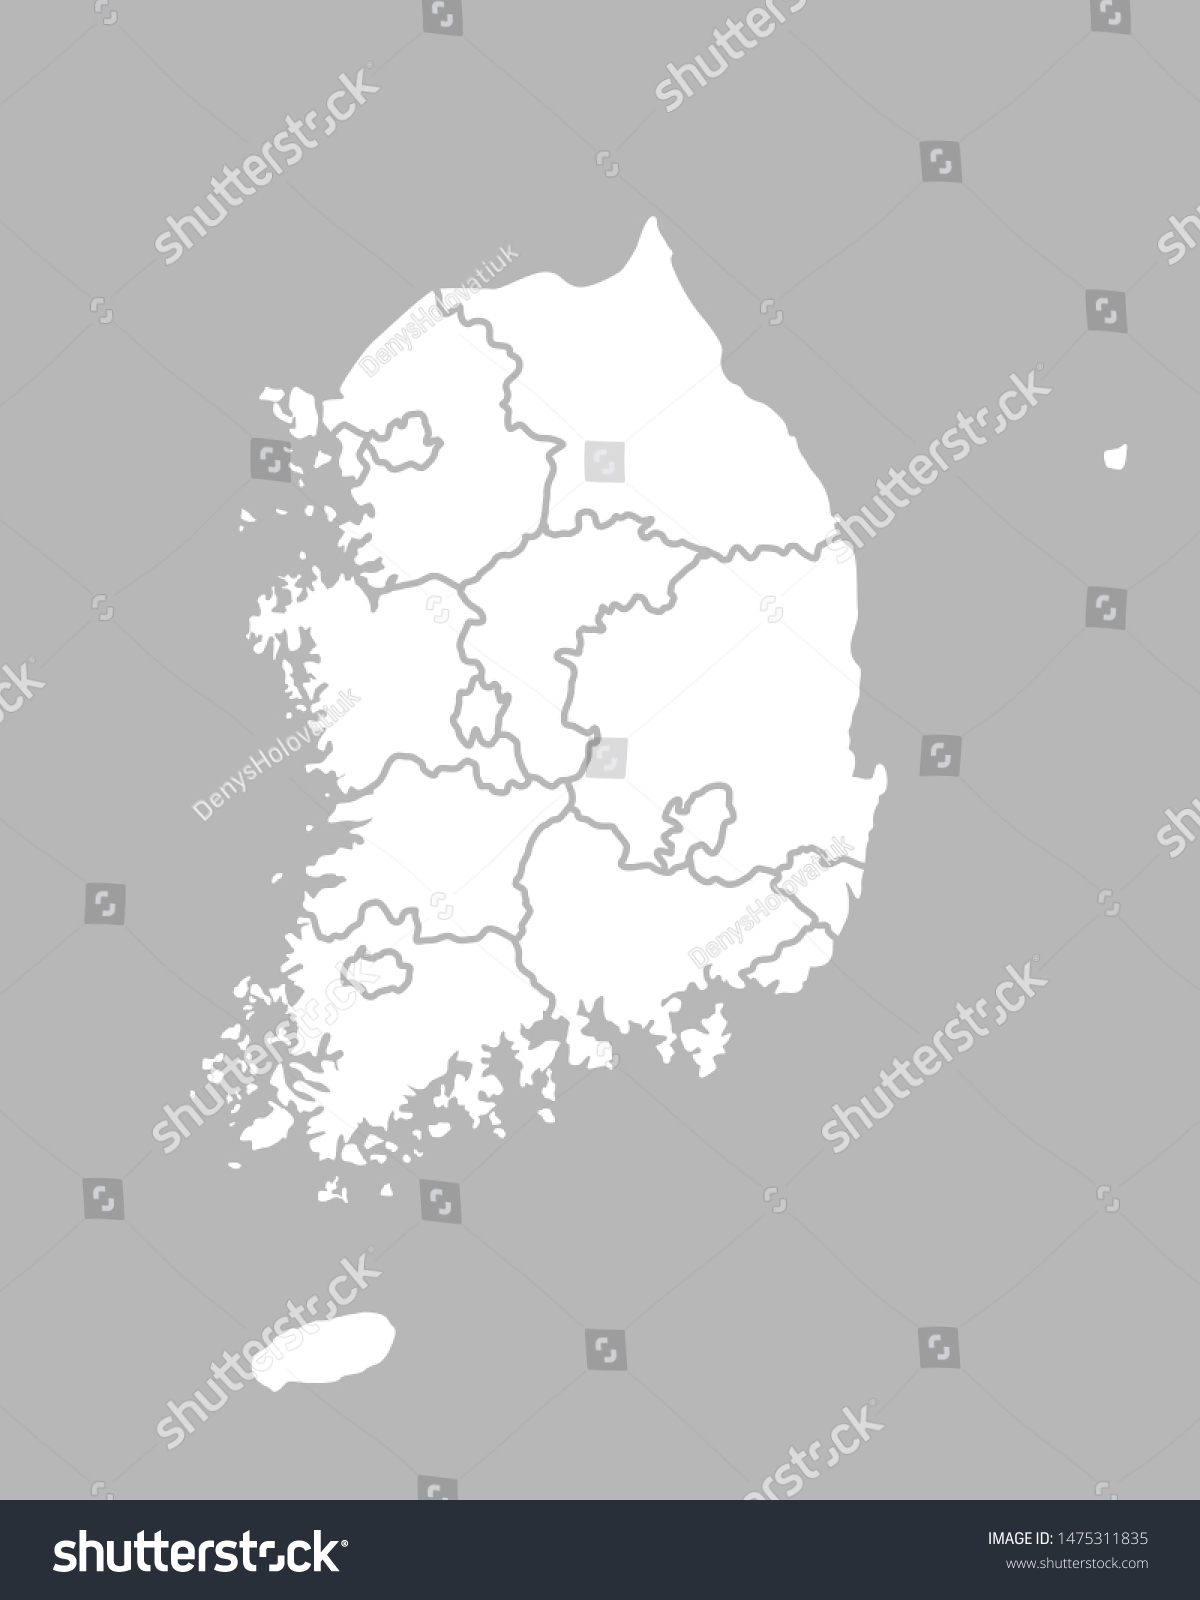 South Korea Blank Map South Korea Blank Map Map South Stock Vector (Royalty Free) 1475311835 |  Shutterstock